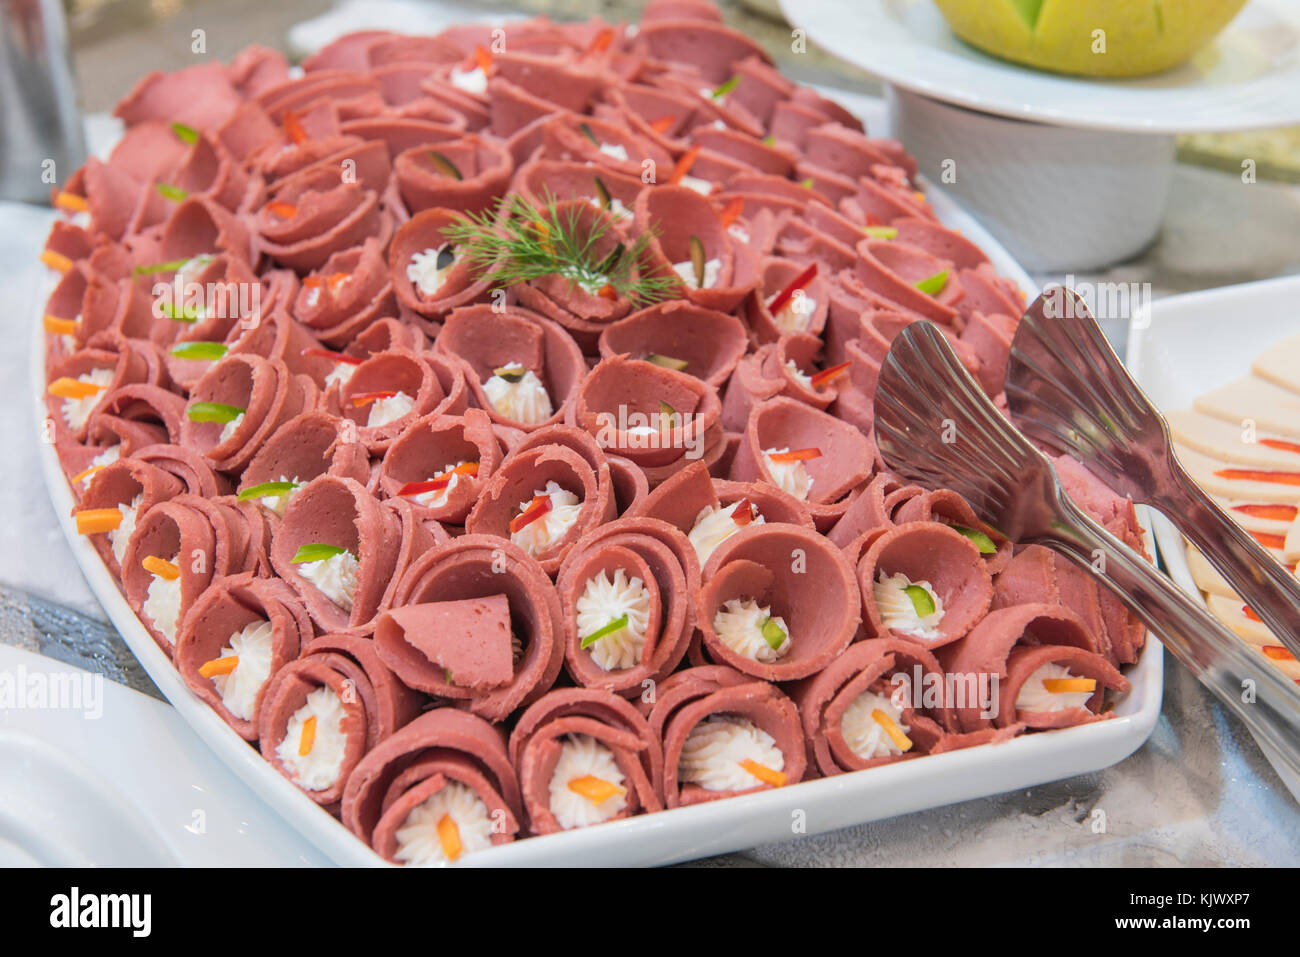 Selection display of cold meat salad food at a luxury restaurant buffet bar area Stock Photo